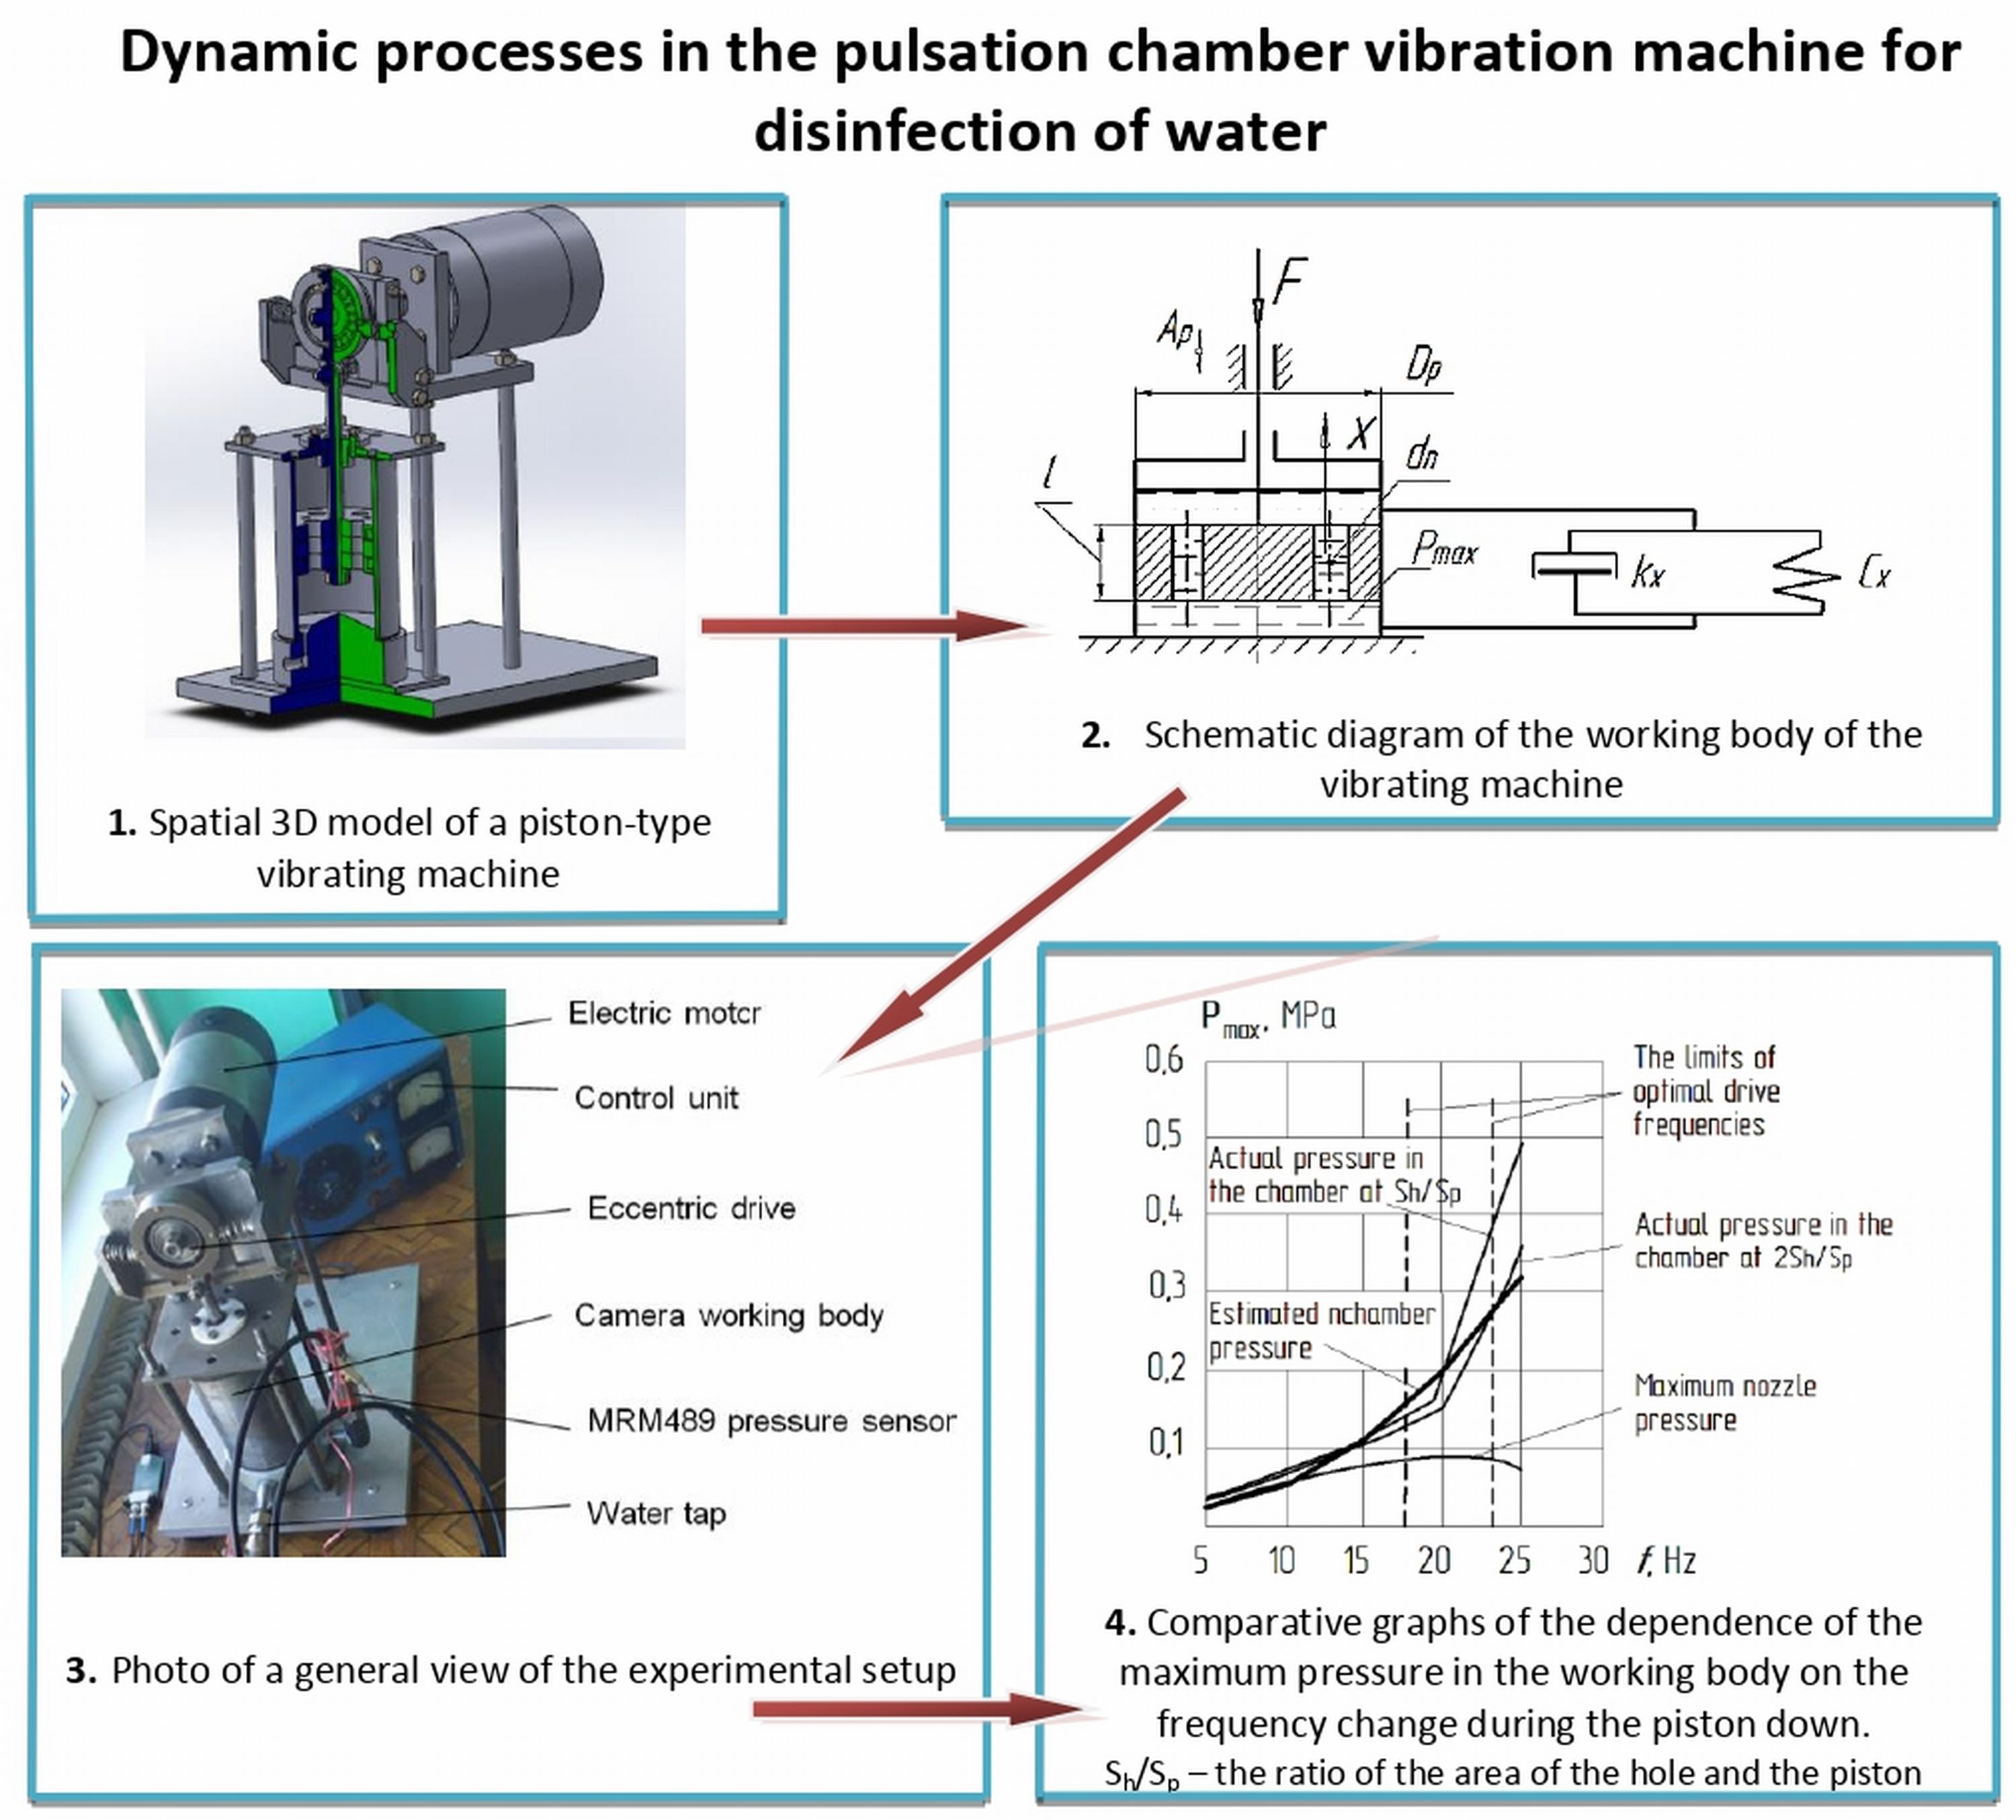 Dynamic processes in the pulsation chamber vibration machine for disinfection of water